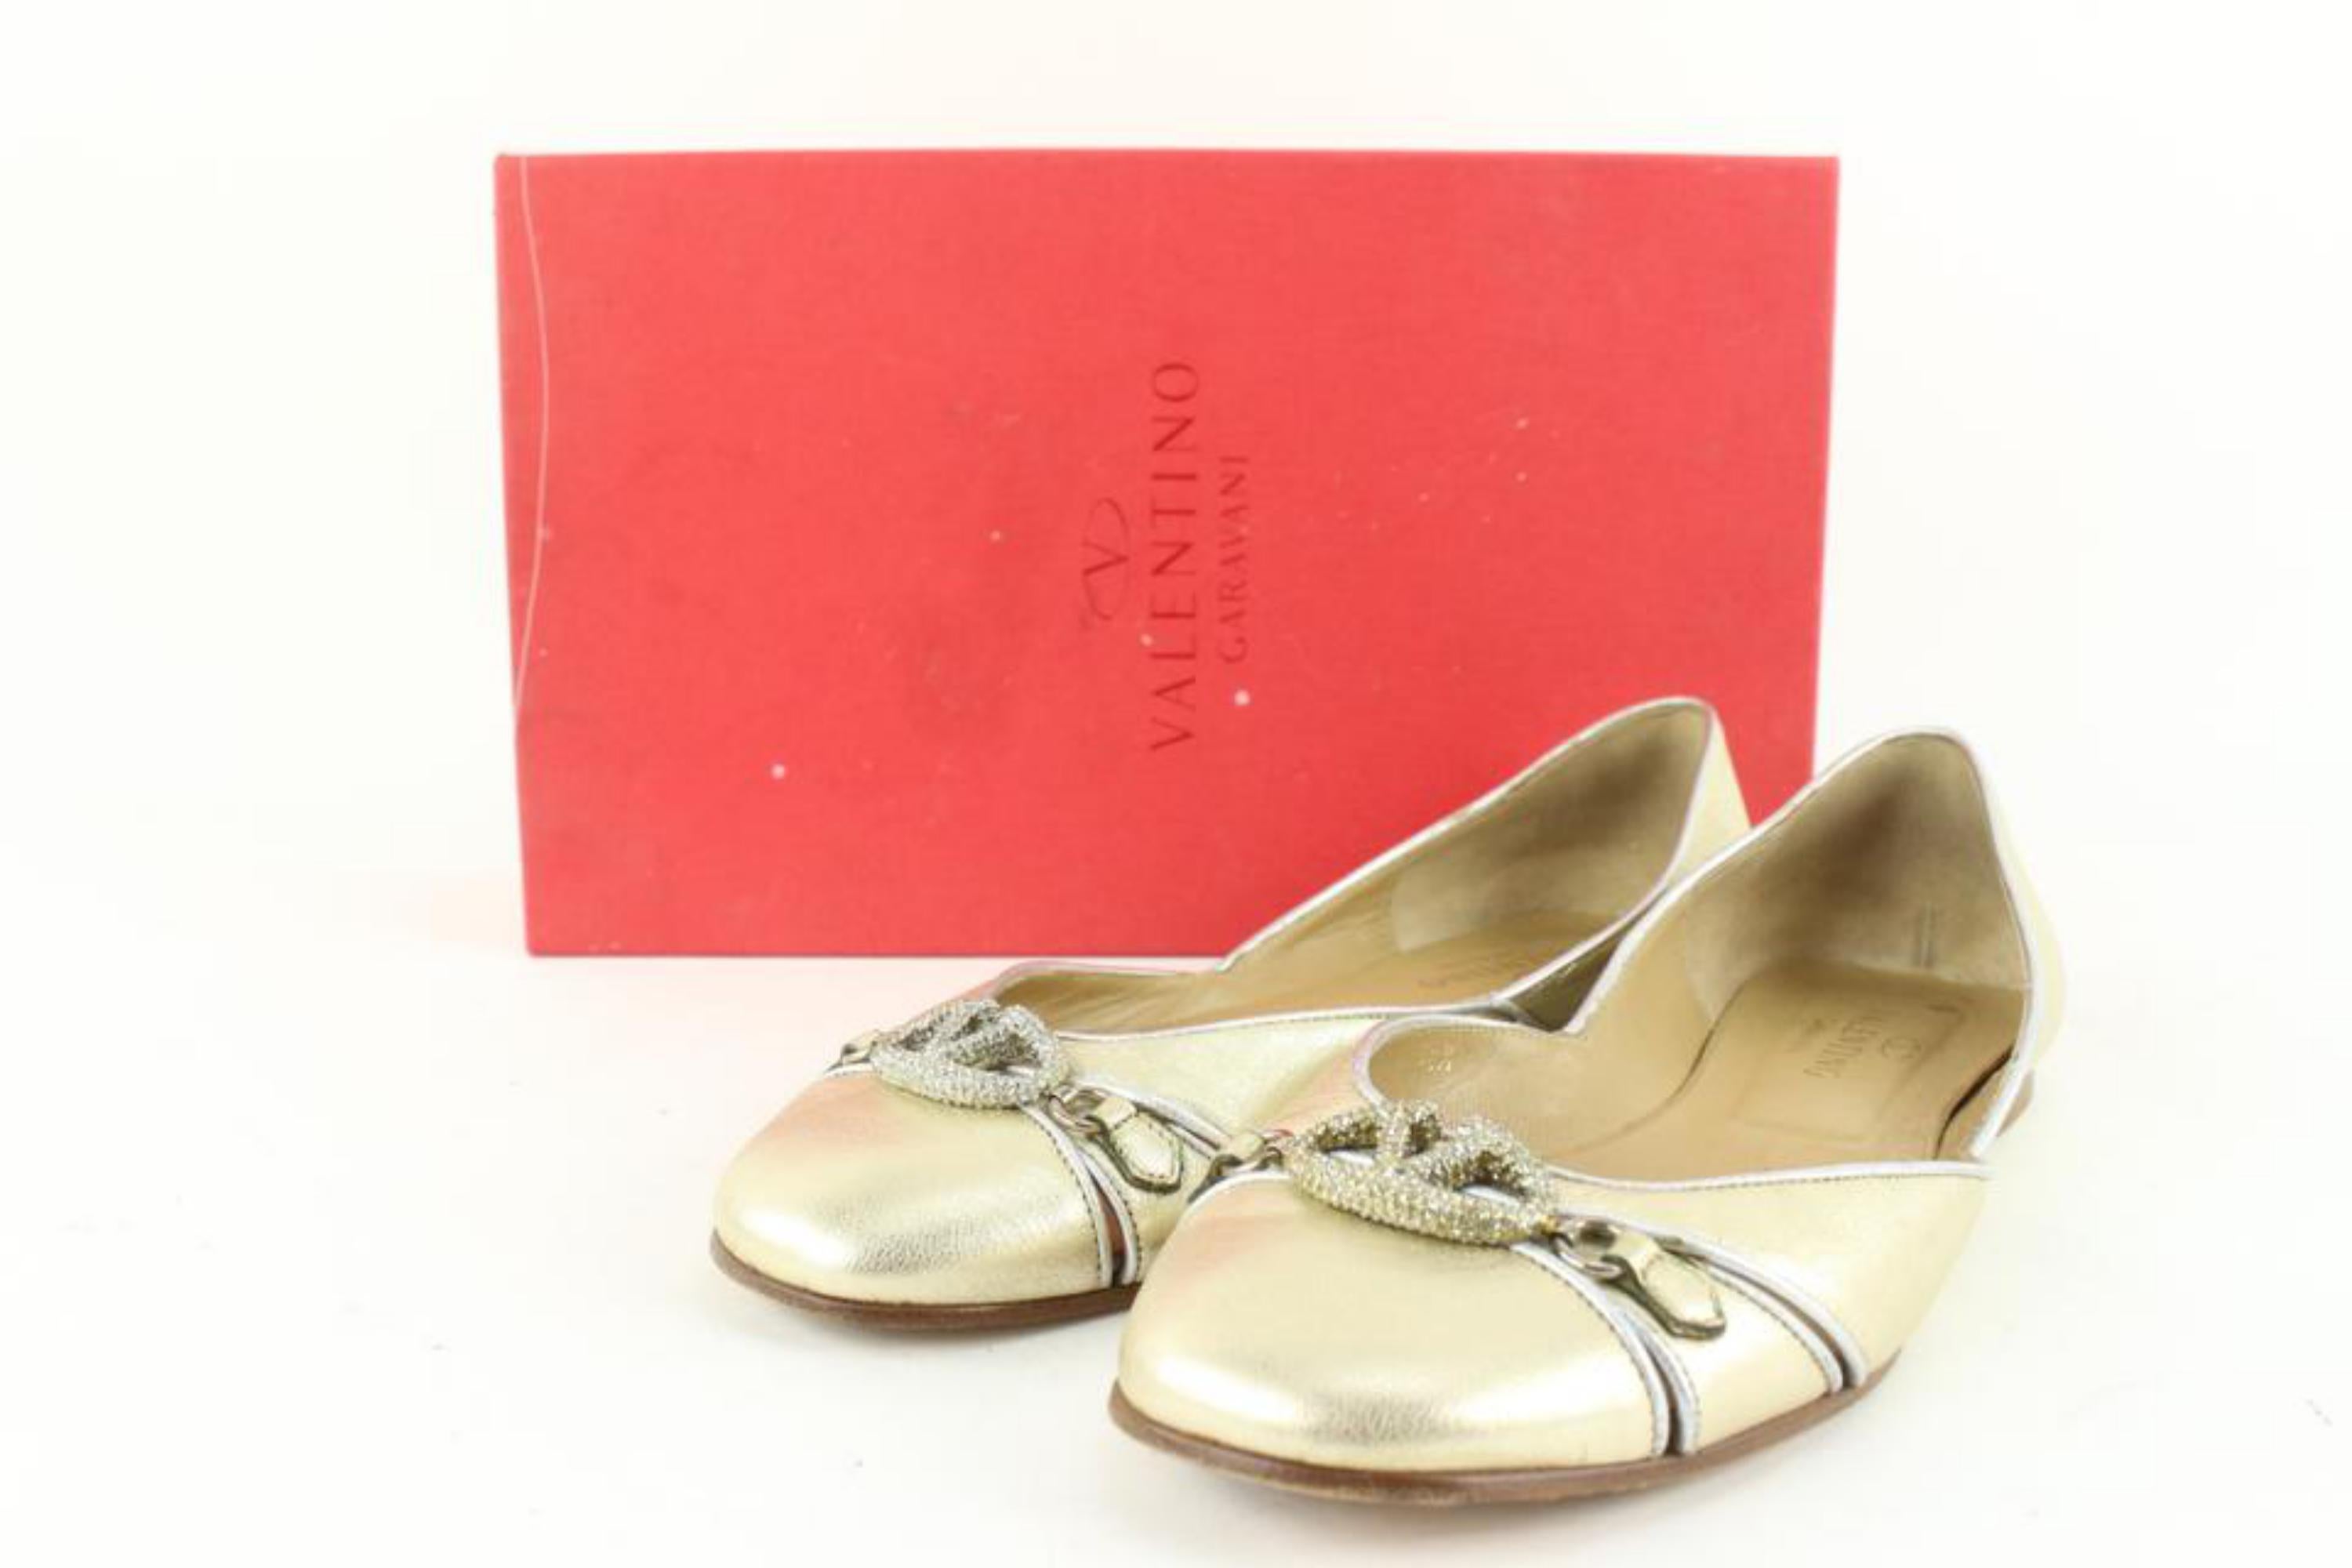 Valentino Size 38.5 Light Gold Leather V Logo Crystal Ballerina Flats 110va57
Date Code/Serial Number: 586
Made In:  Italy
Measurements: Length:  10